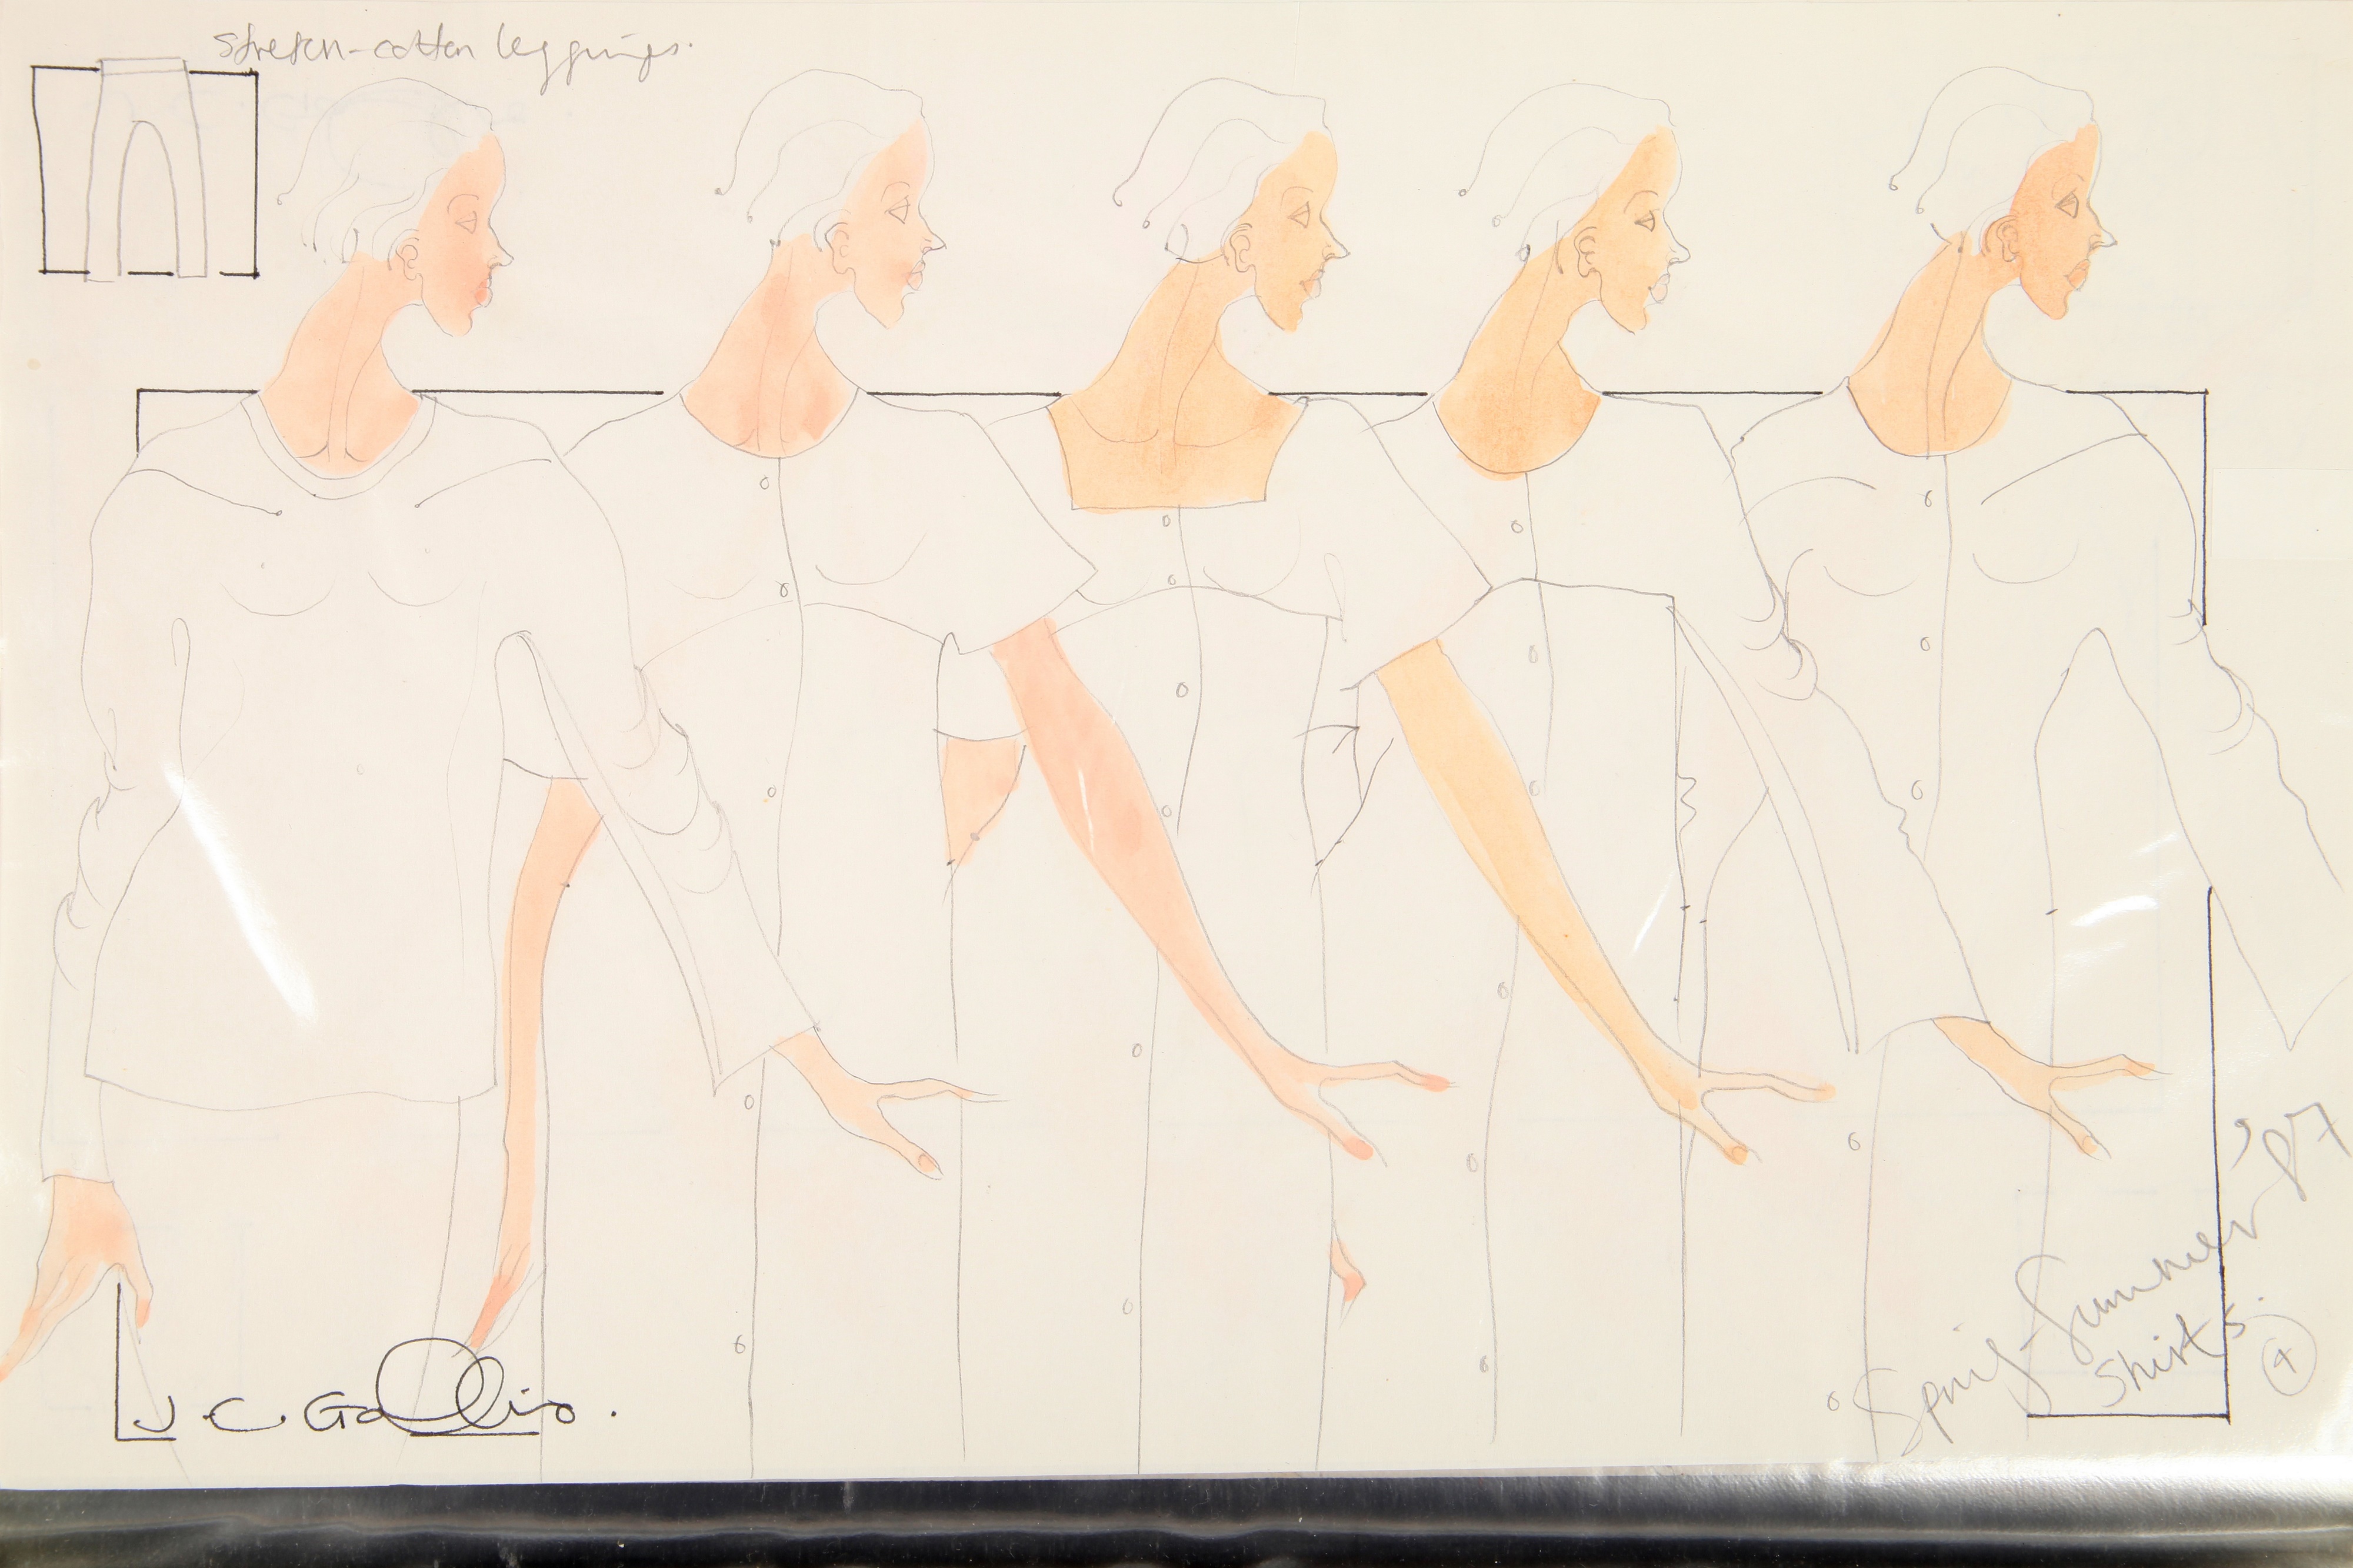 John Galliano preparatory sketch for his 'Incroyables' degree show  collection, 1984 in United Kingdom